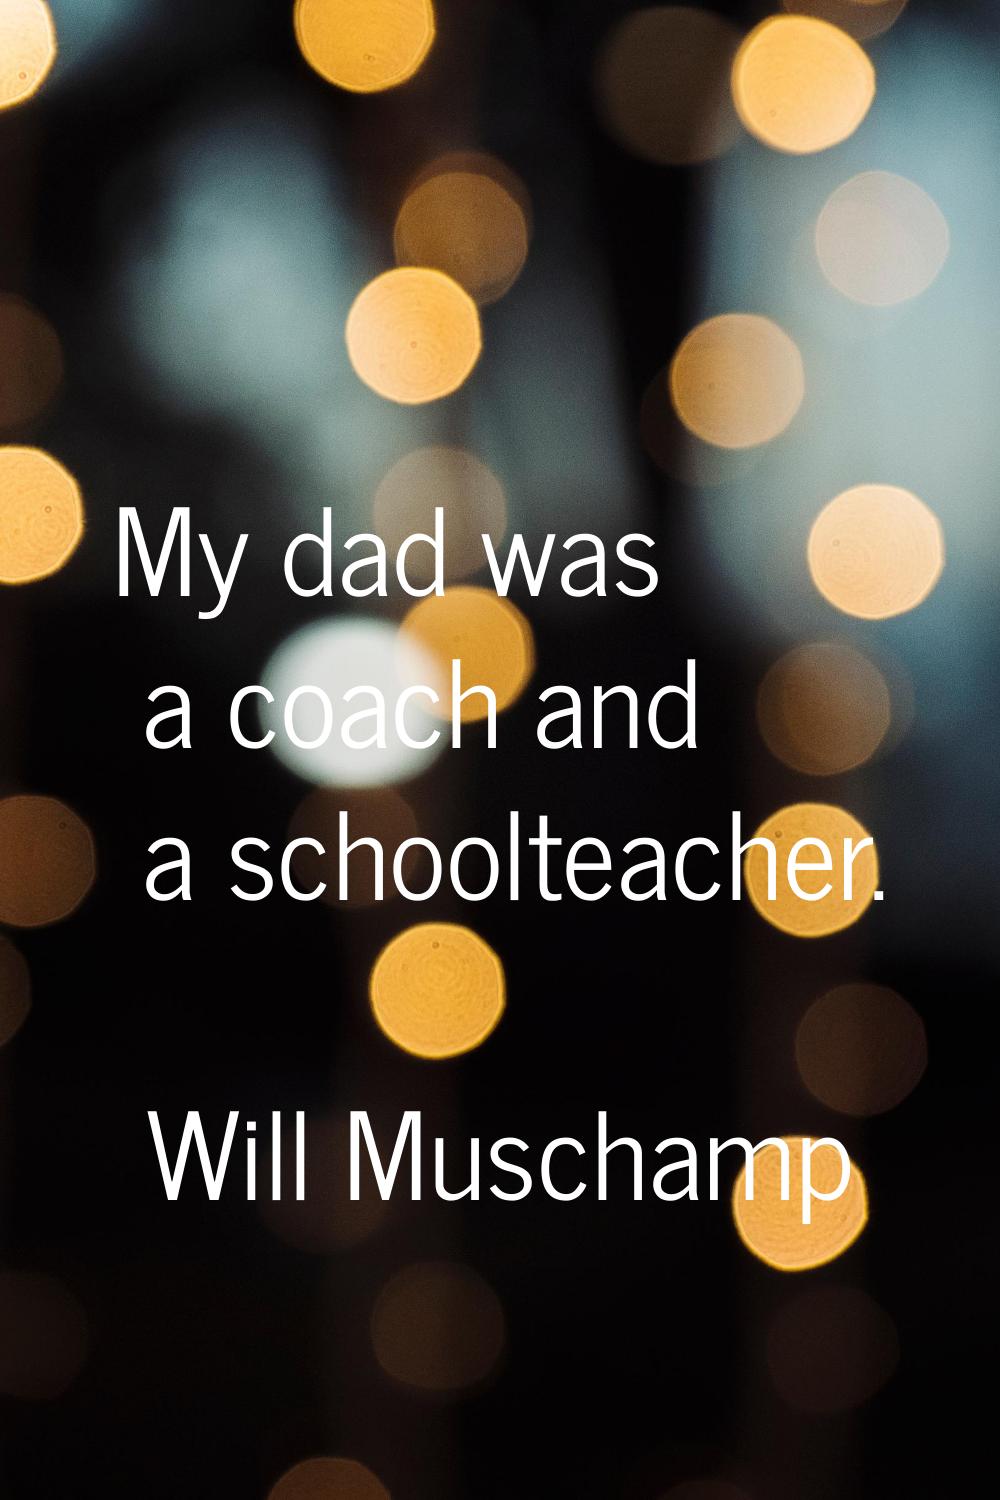 My dad was a coach and a schoolteacher.